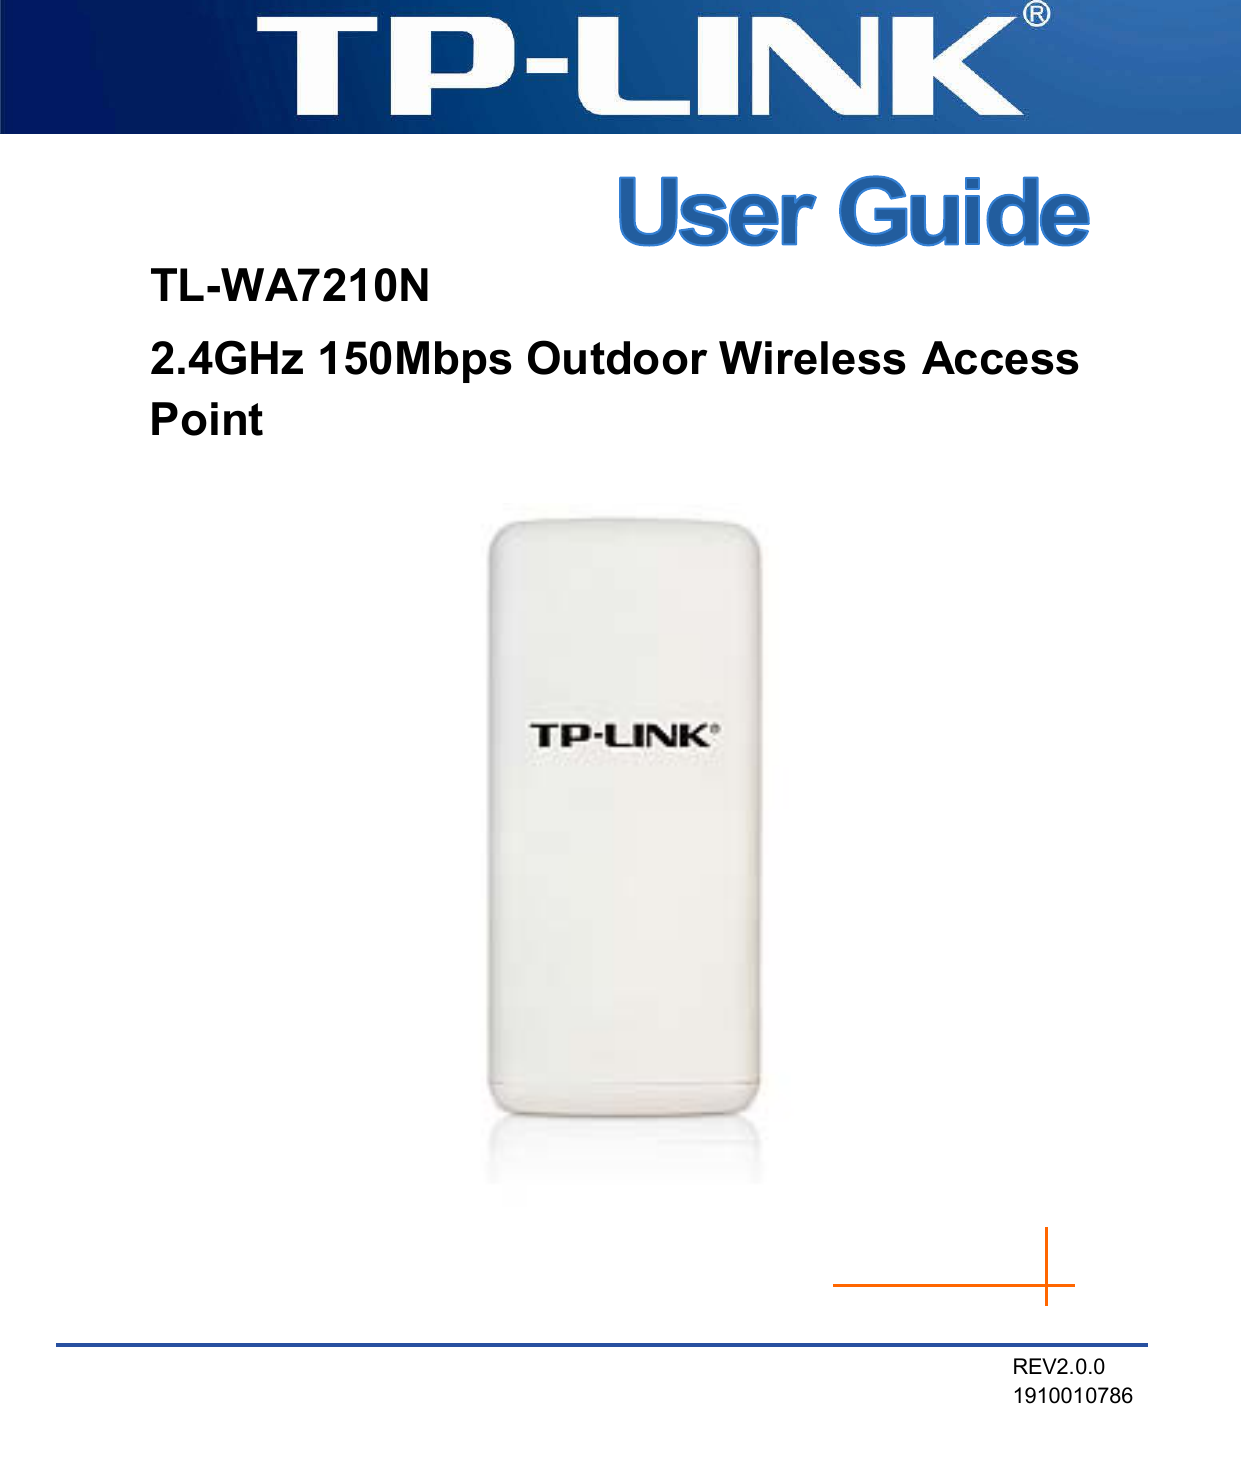    TL-WA7210N 2.4GHz 150Mbps Outdoor Wireless Access Point   REV2.0.0 1910010786 